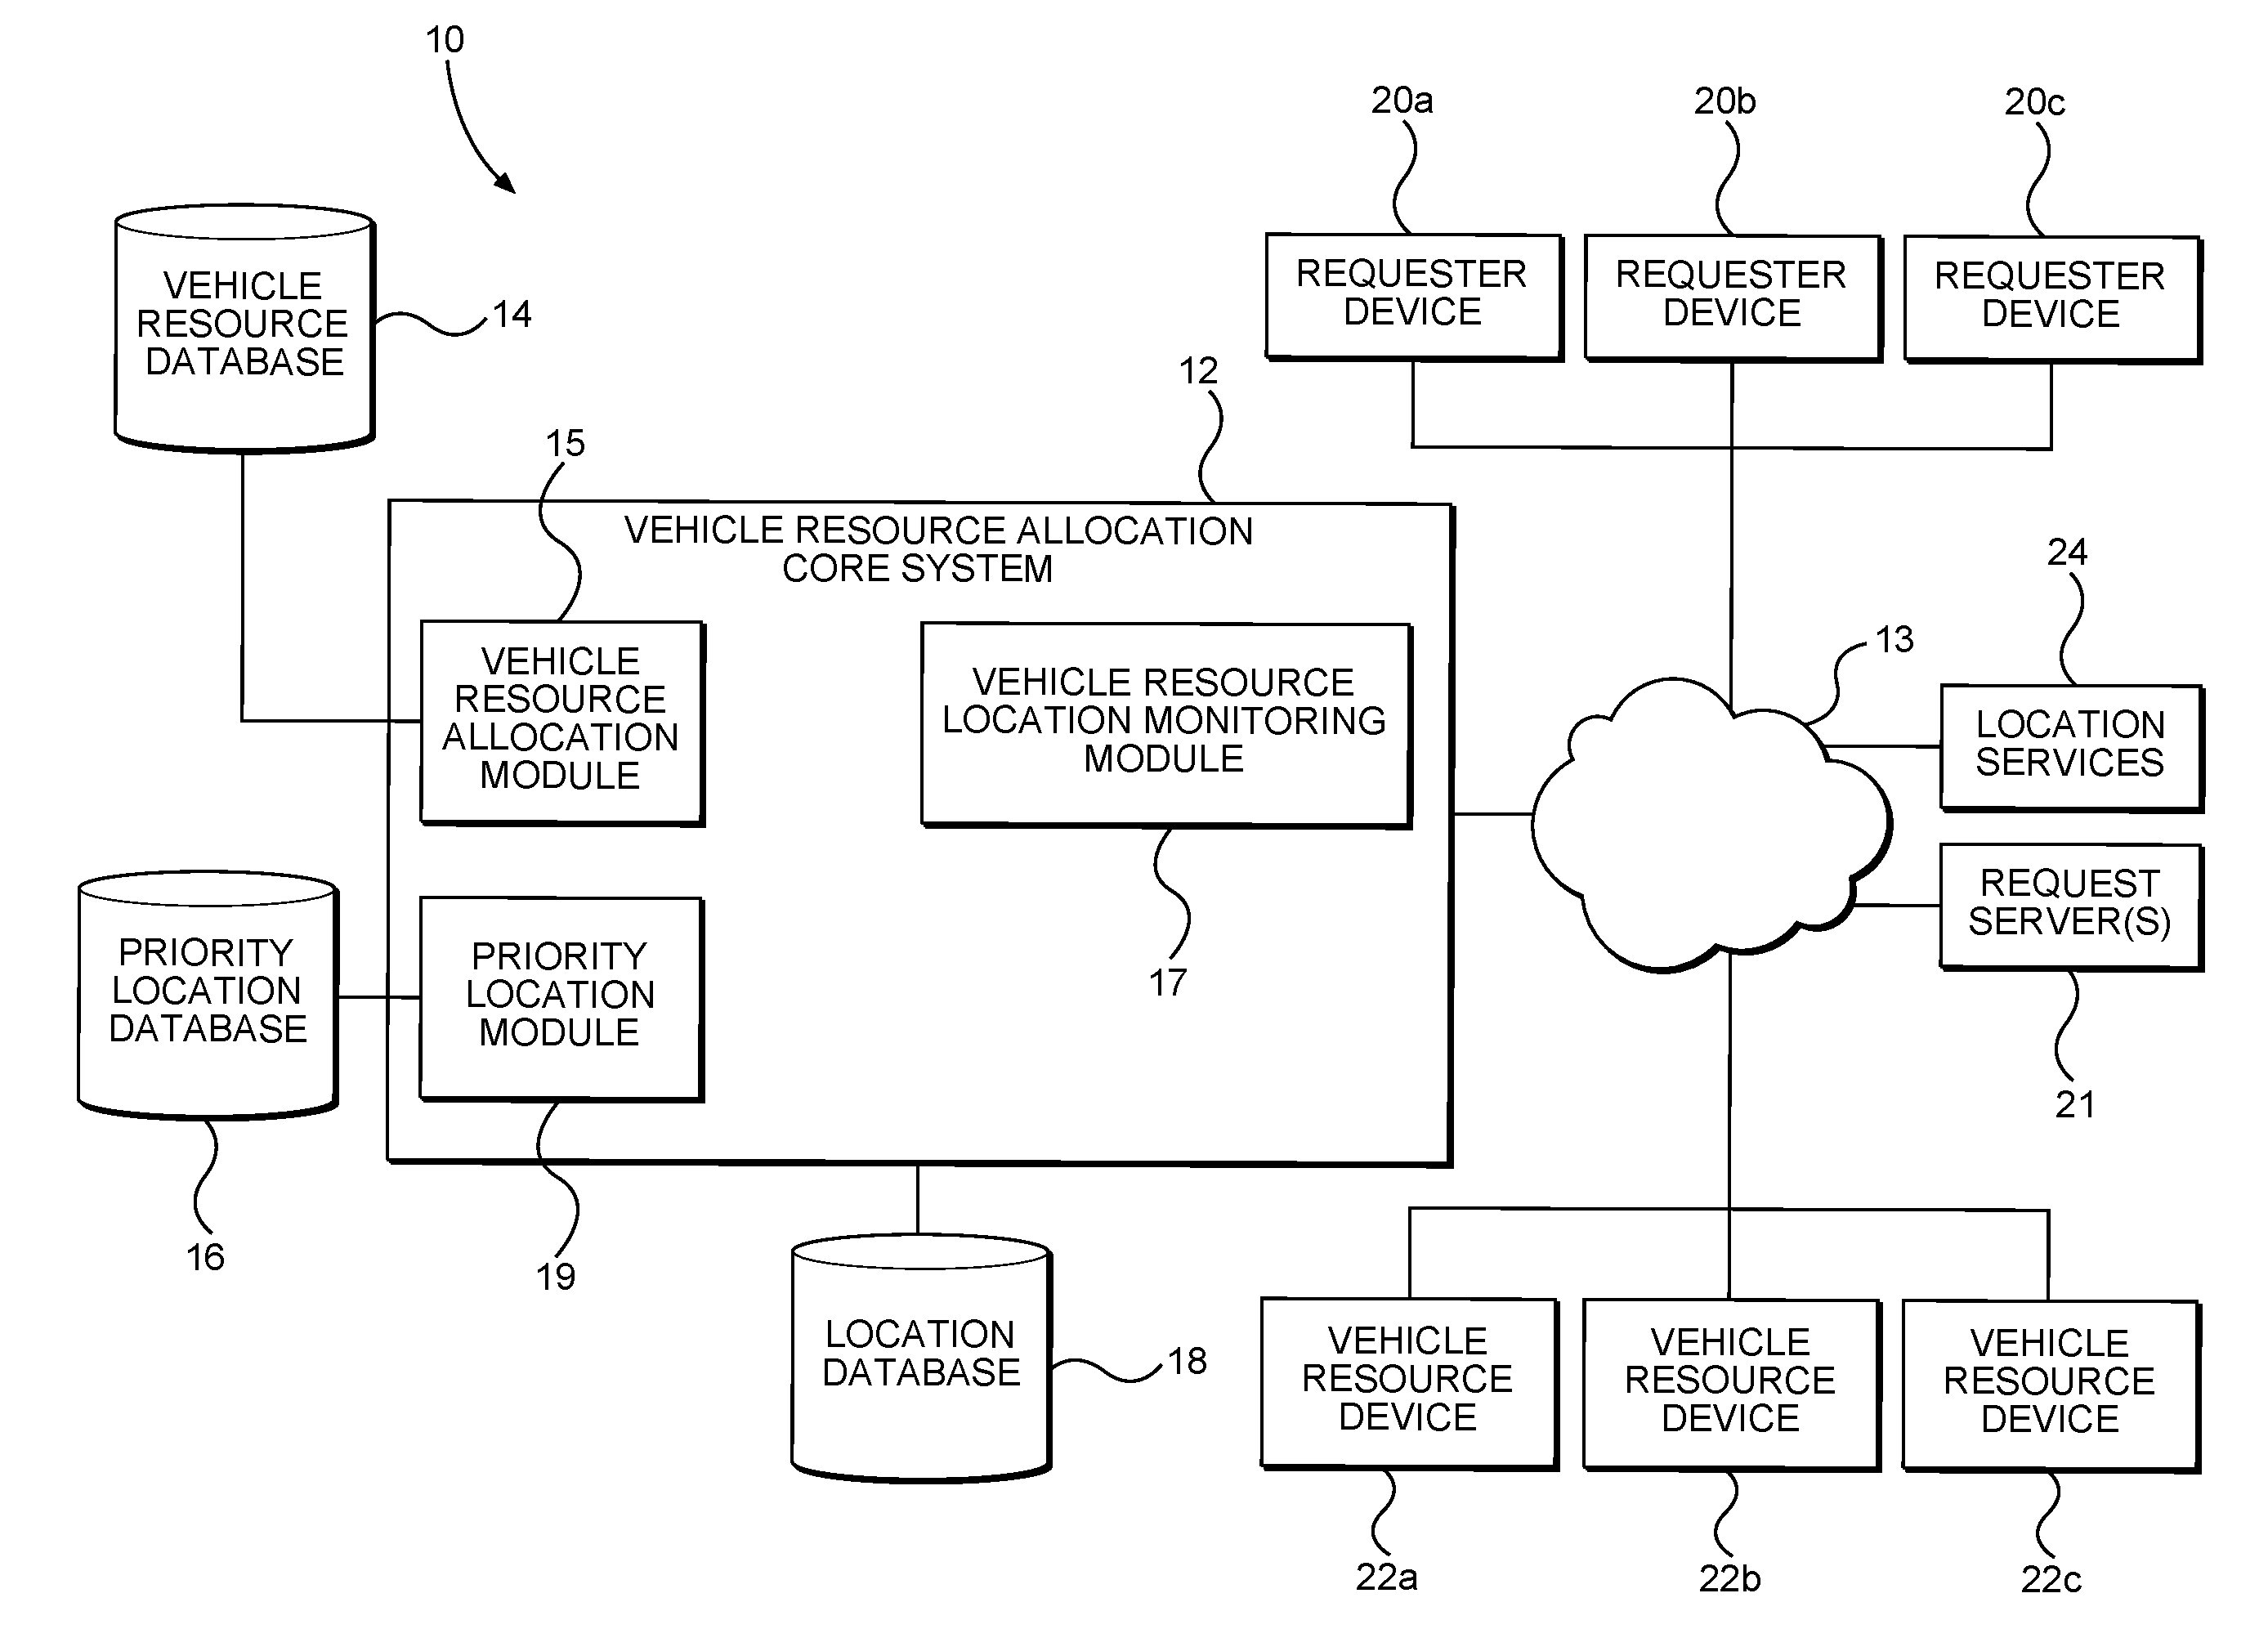 Systems and Methods for Vehicle Resource Management